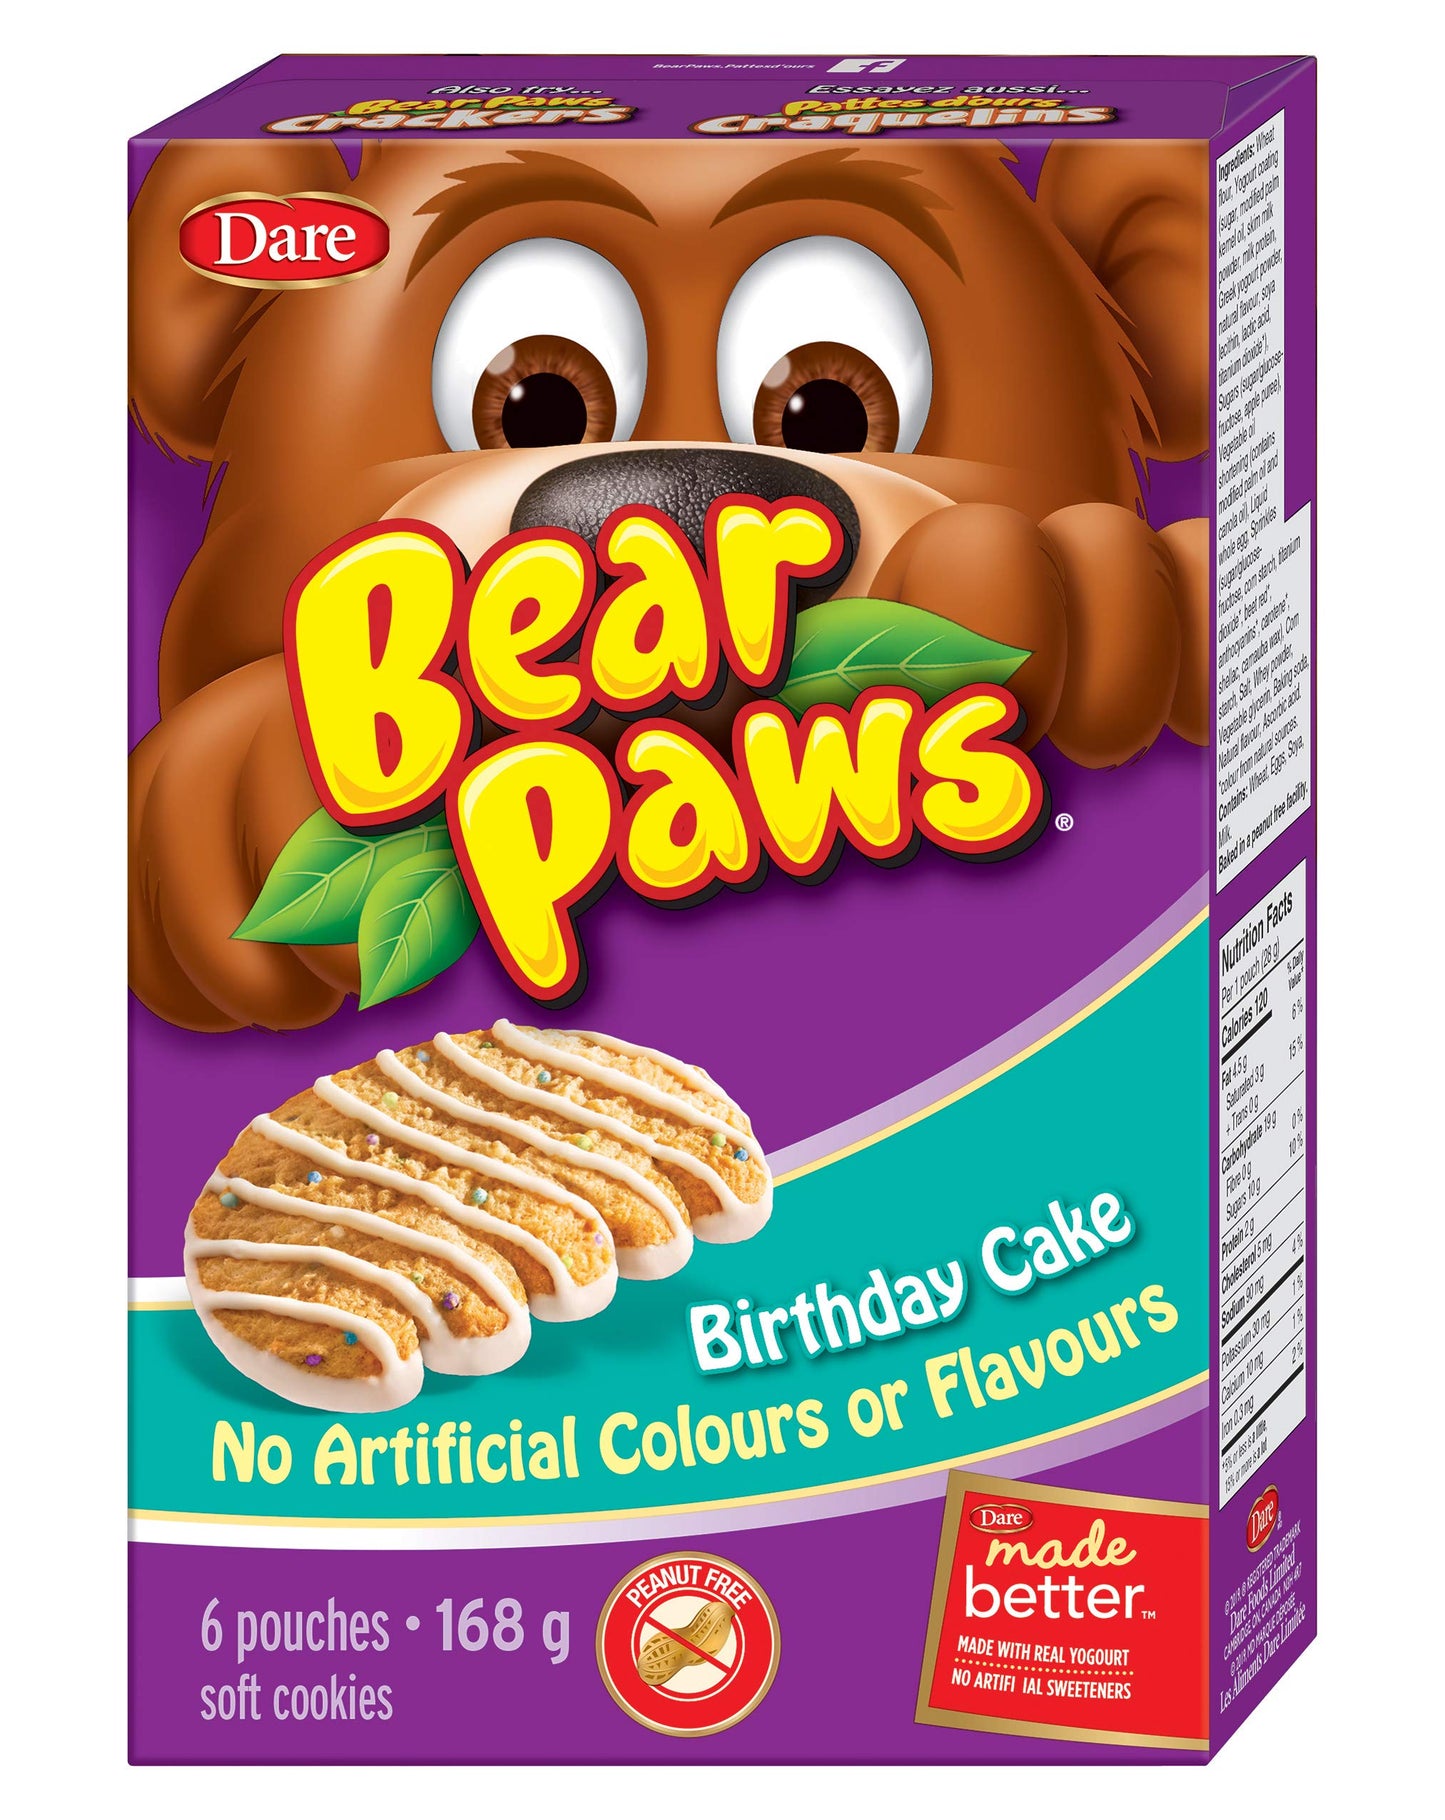 Dare Bear Paws Birthday Cake Soft Cookies, 168g/5.92oz (Shipped from Canada)